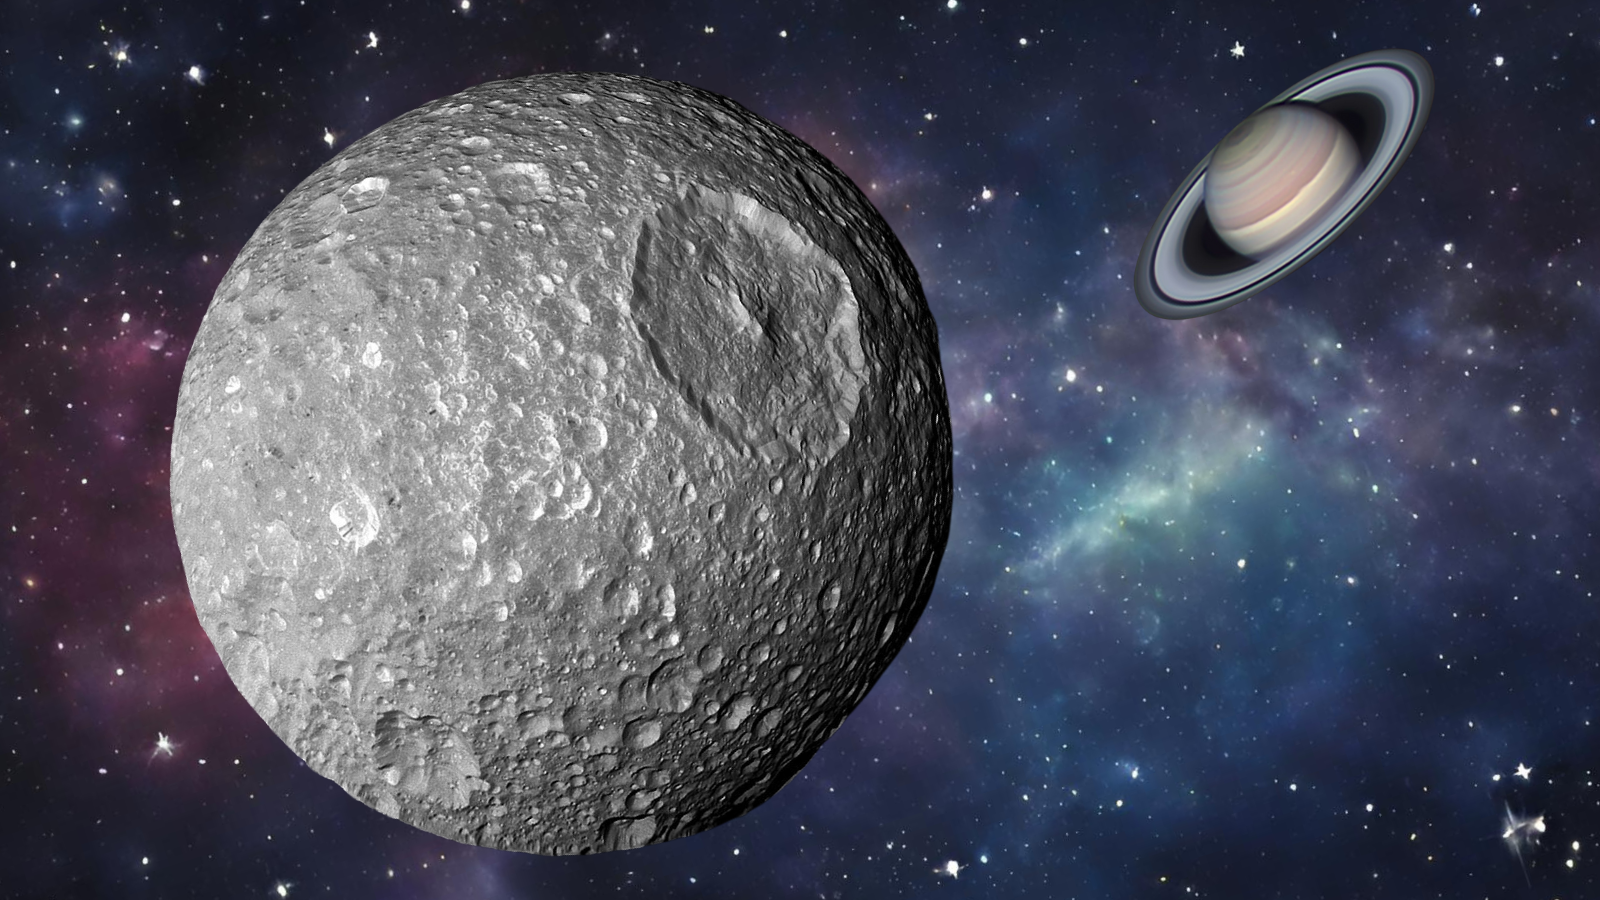 Saturn’s ‘Death Star’ moon Mimas may have gotten huge buried ocean from ringed planet’s powerful pull Space